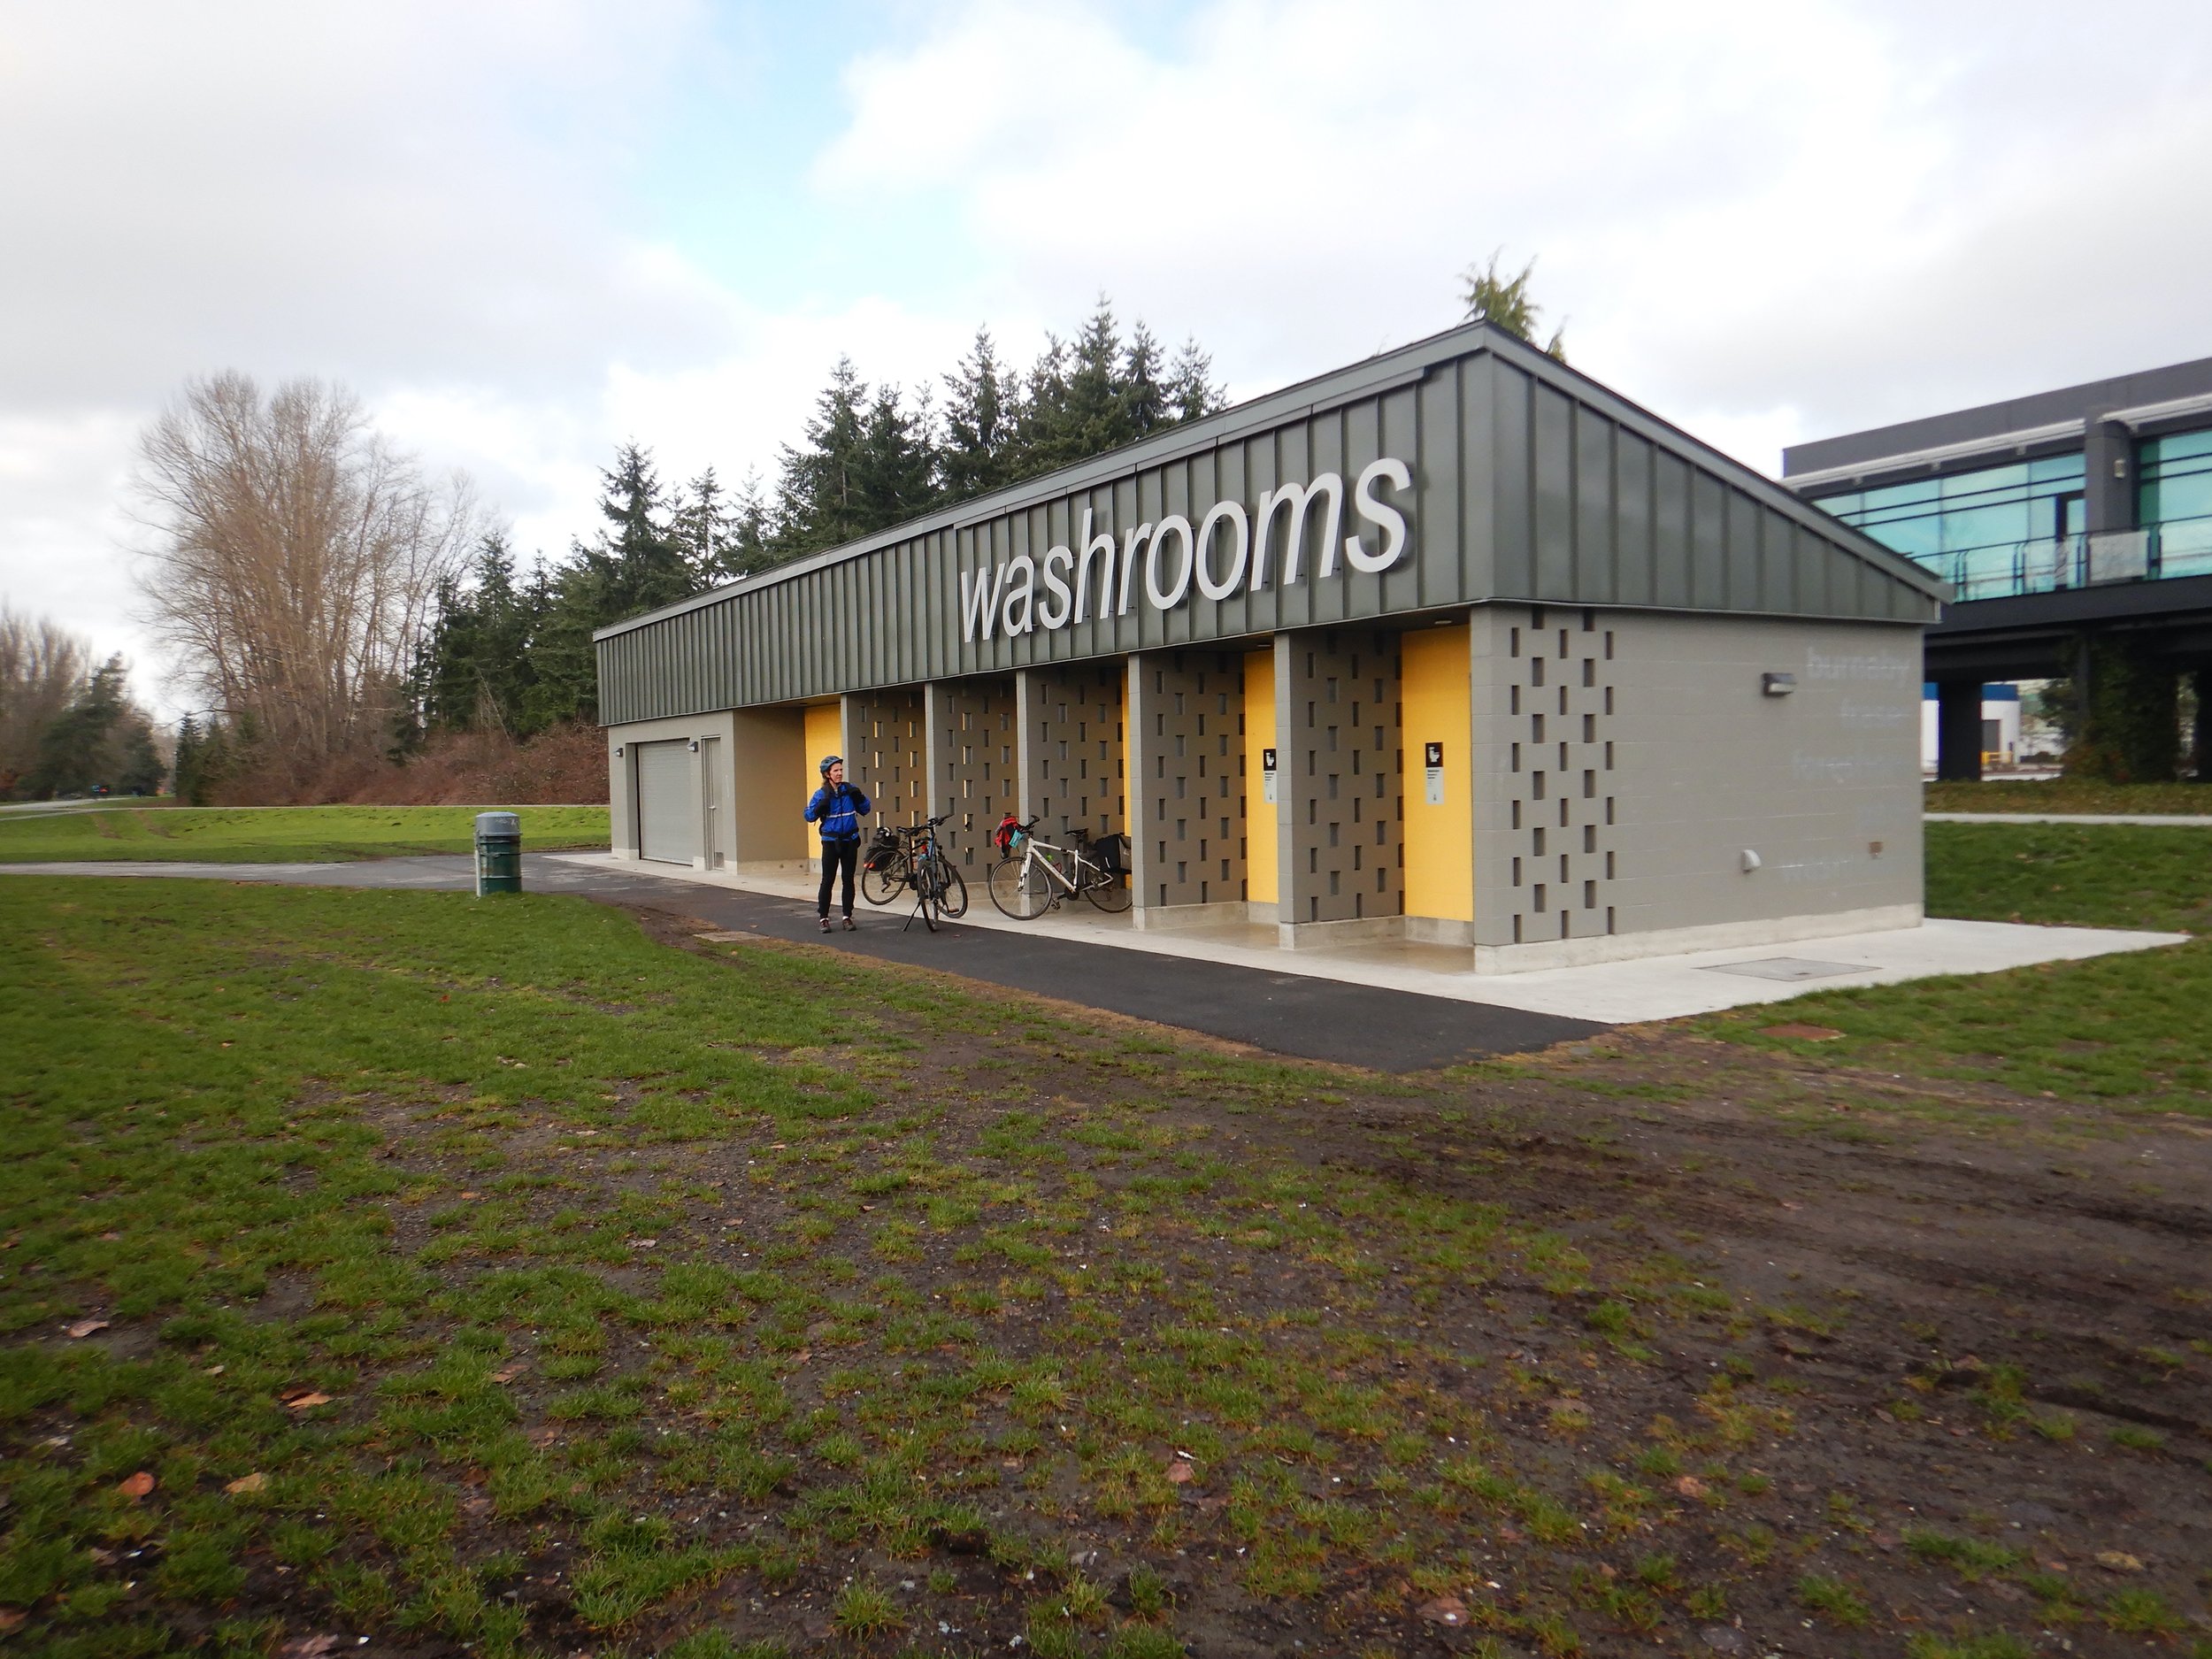 Finally, the New Washrooms in Fraser Foreshore Park, image by Iain